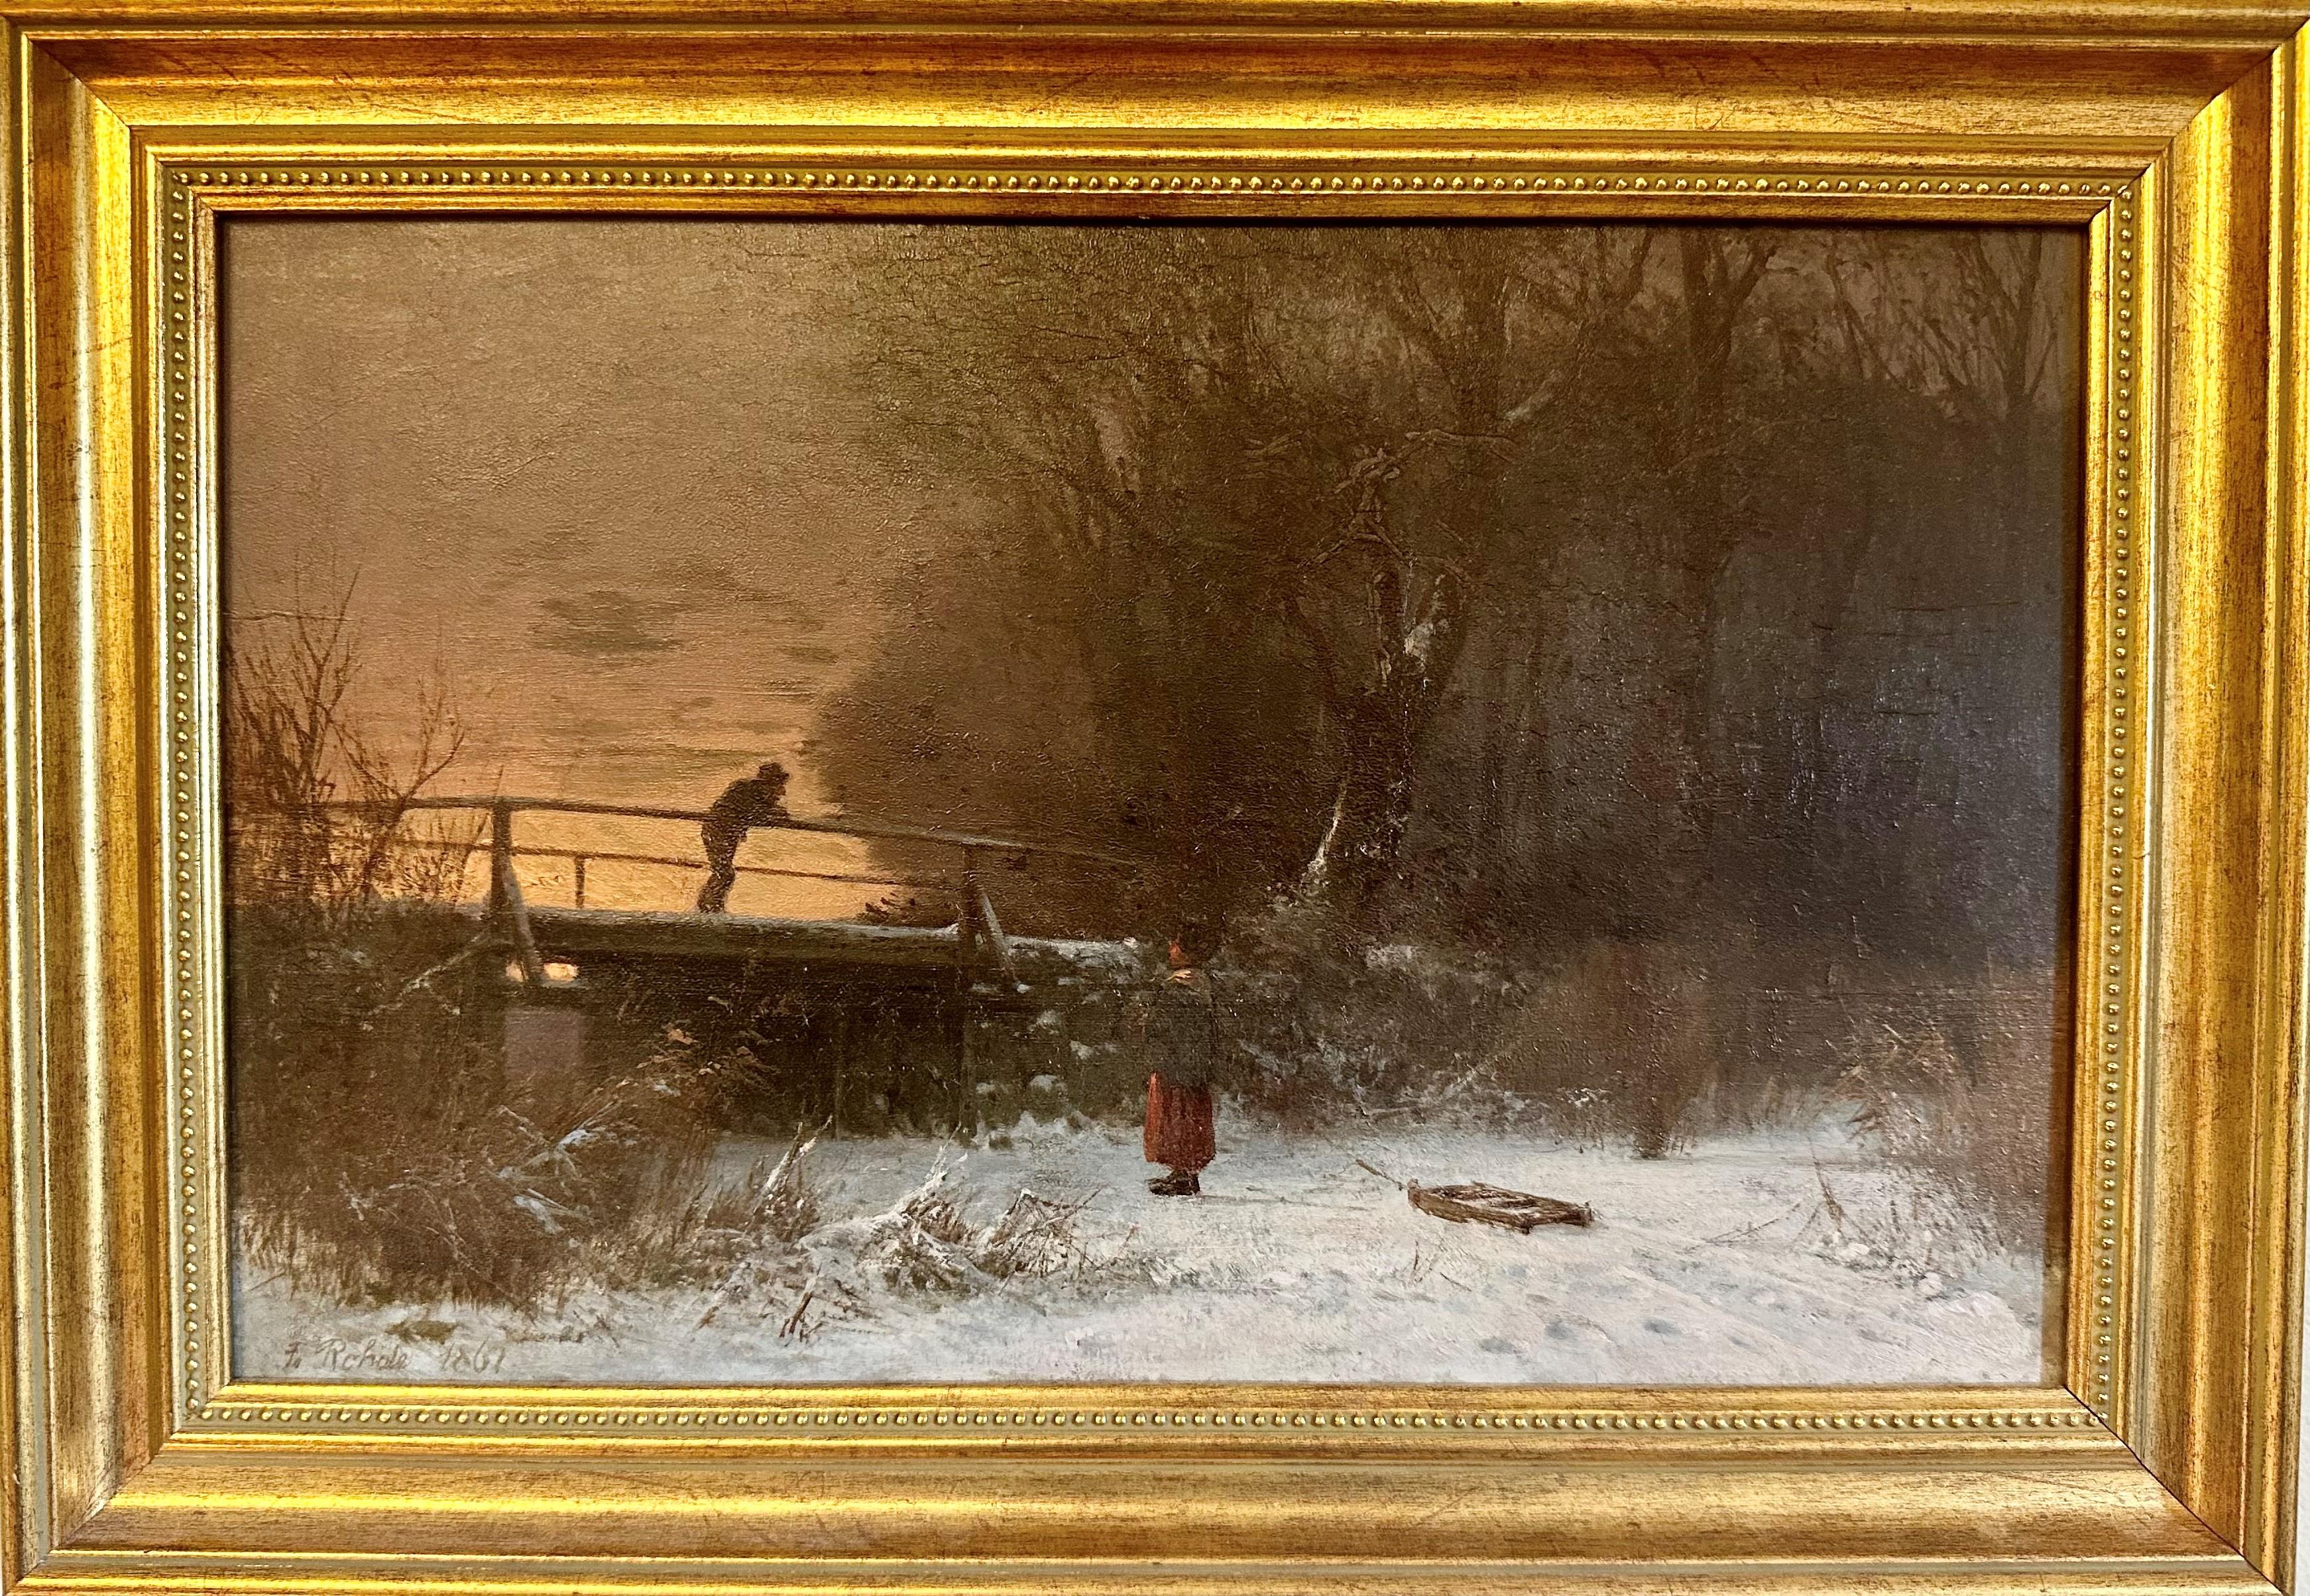 Girl with sledge by the bridge